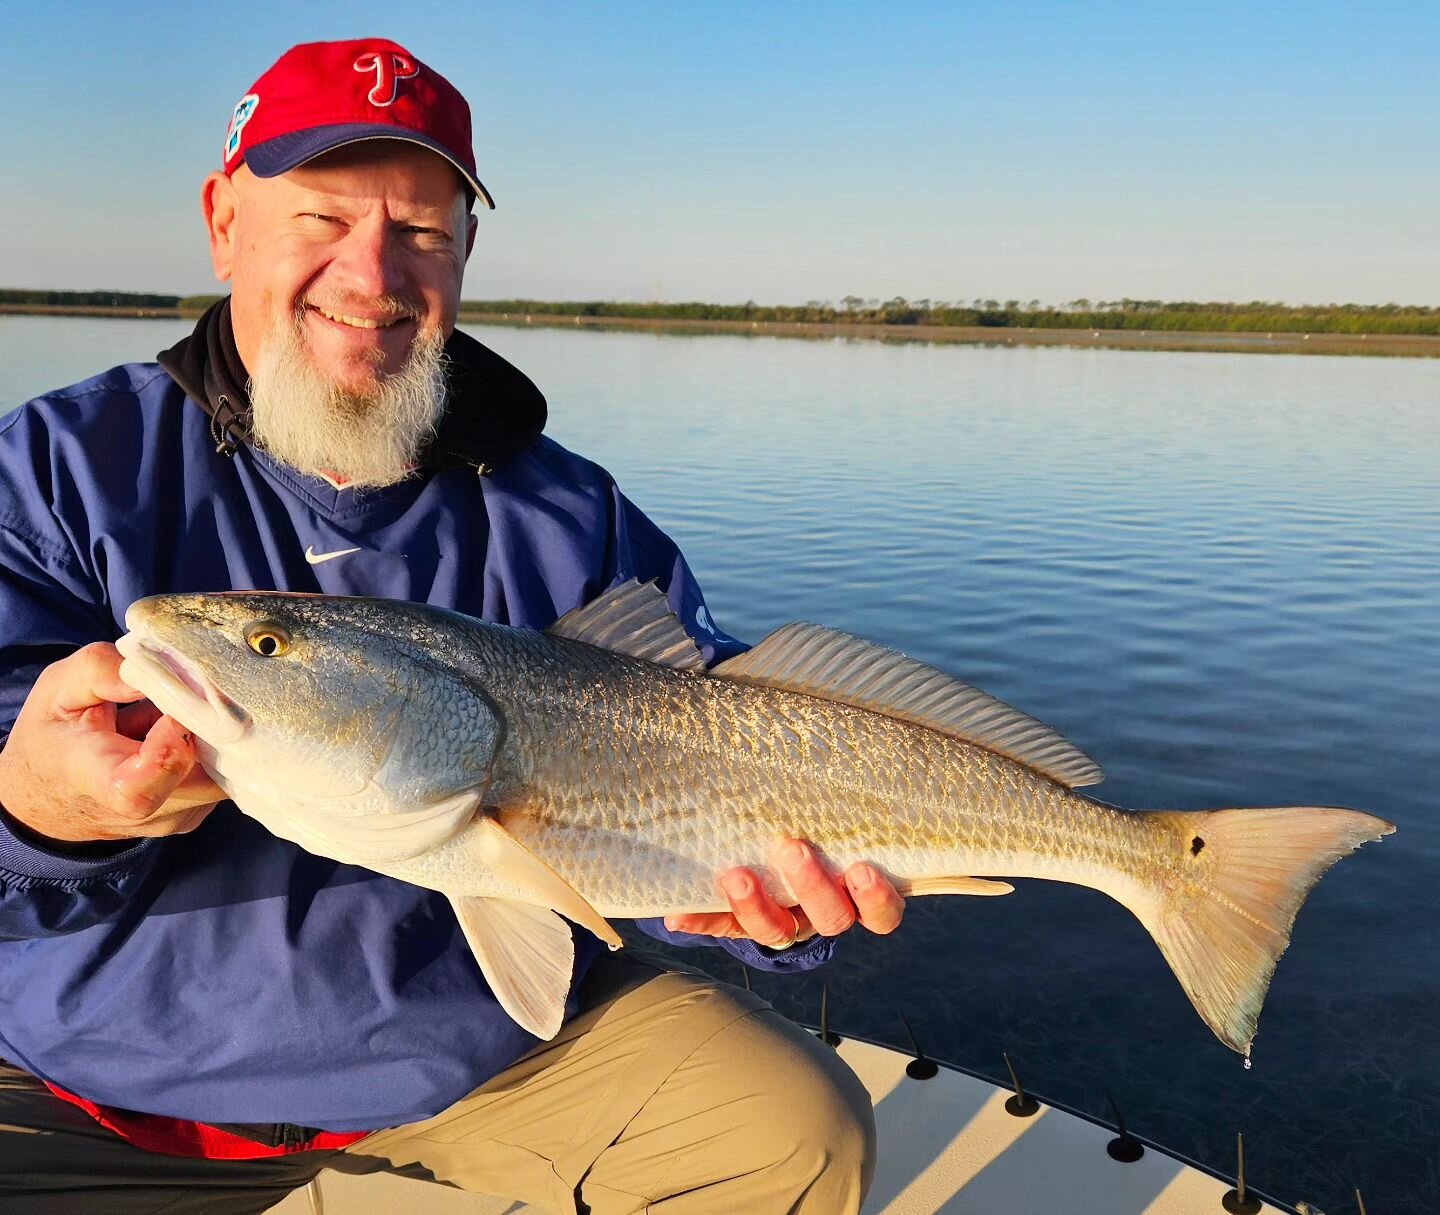 Bill had a banner morning throwing artificials. Caught several redfish and managed to put together an inshore slam.